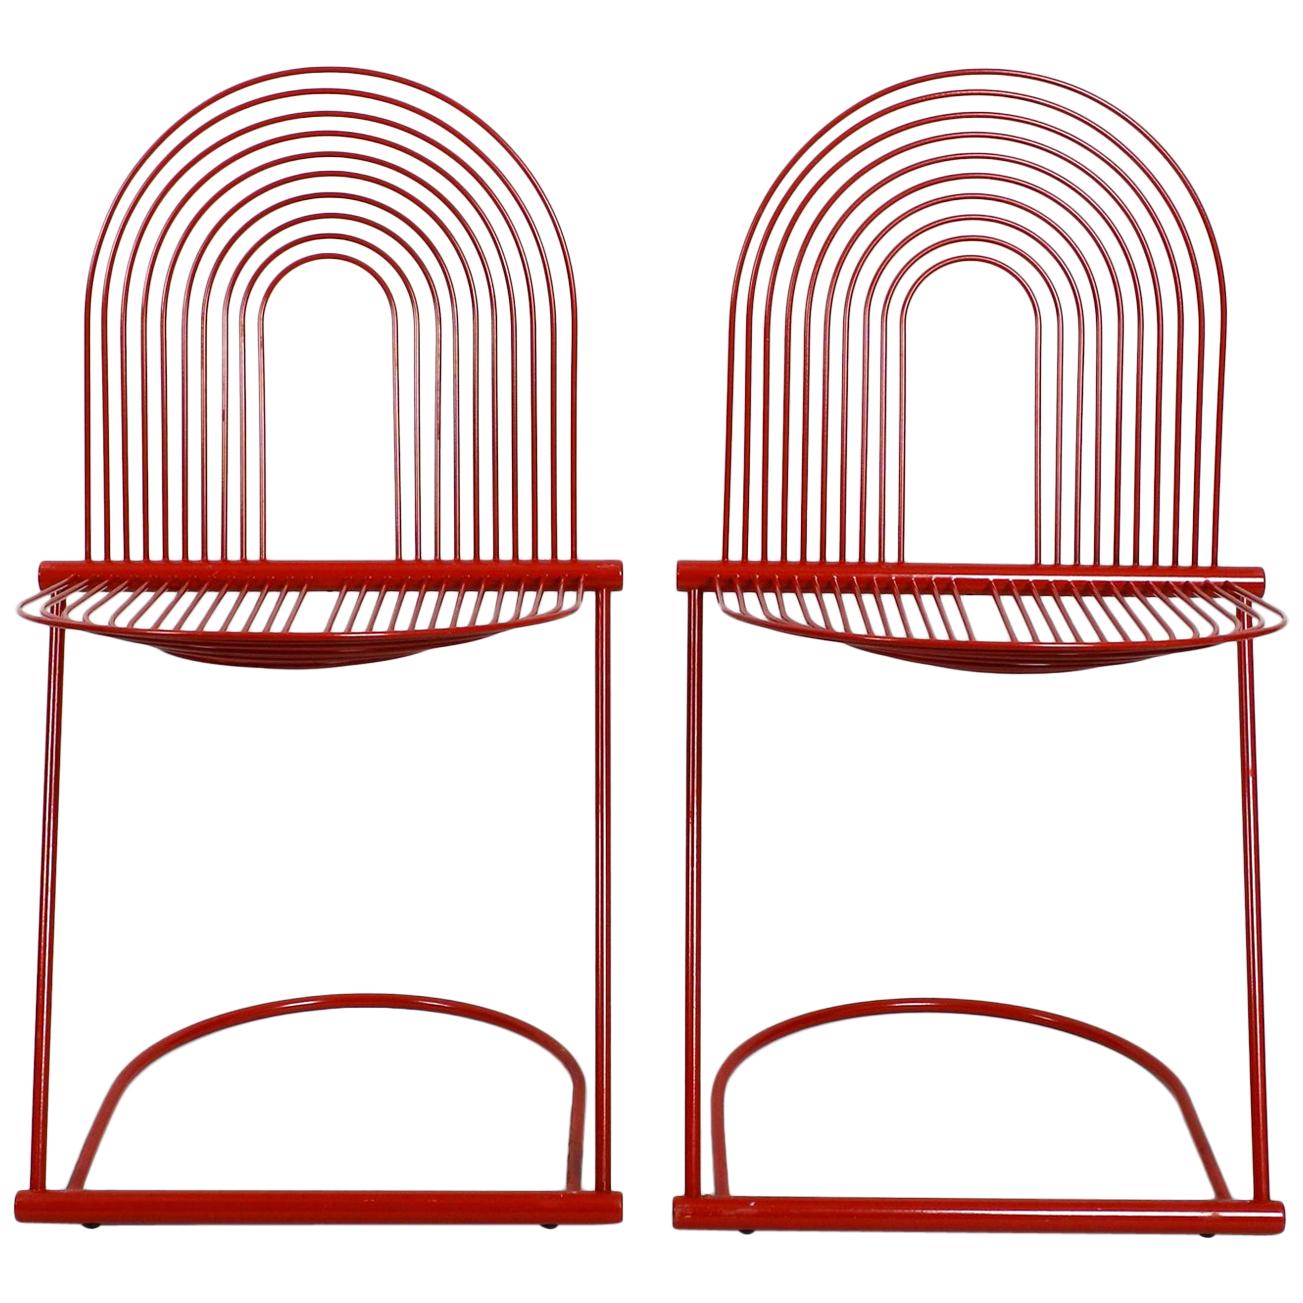 Pair of Rare Swing Chairs Jutta and Herbert Ohl for Rosenthal Studio Linie, 1982